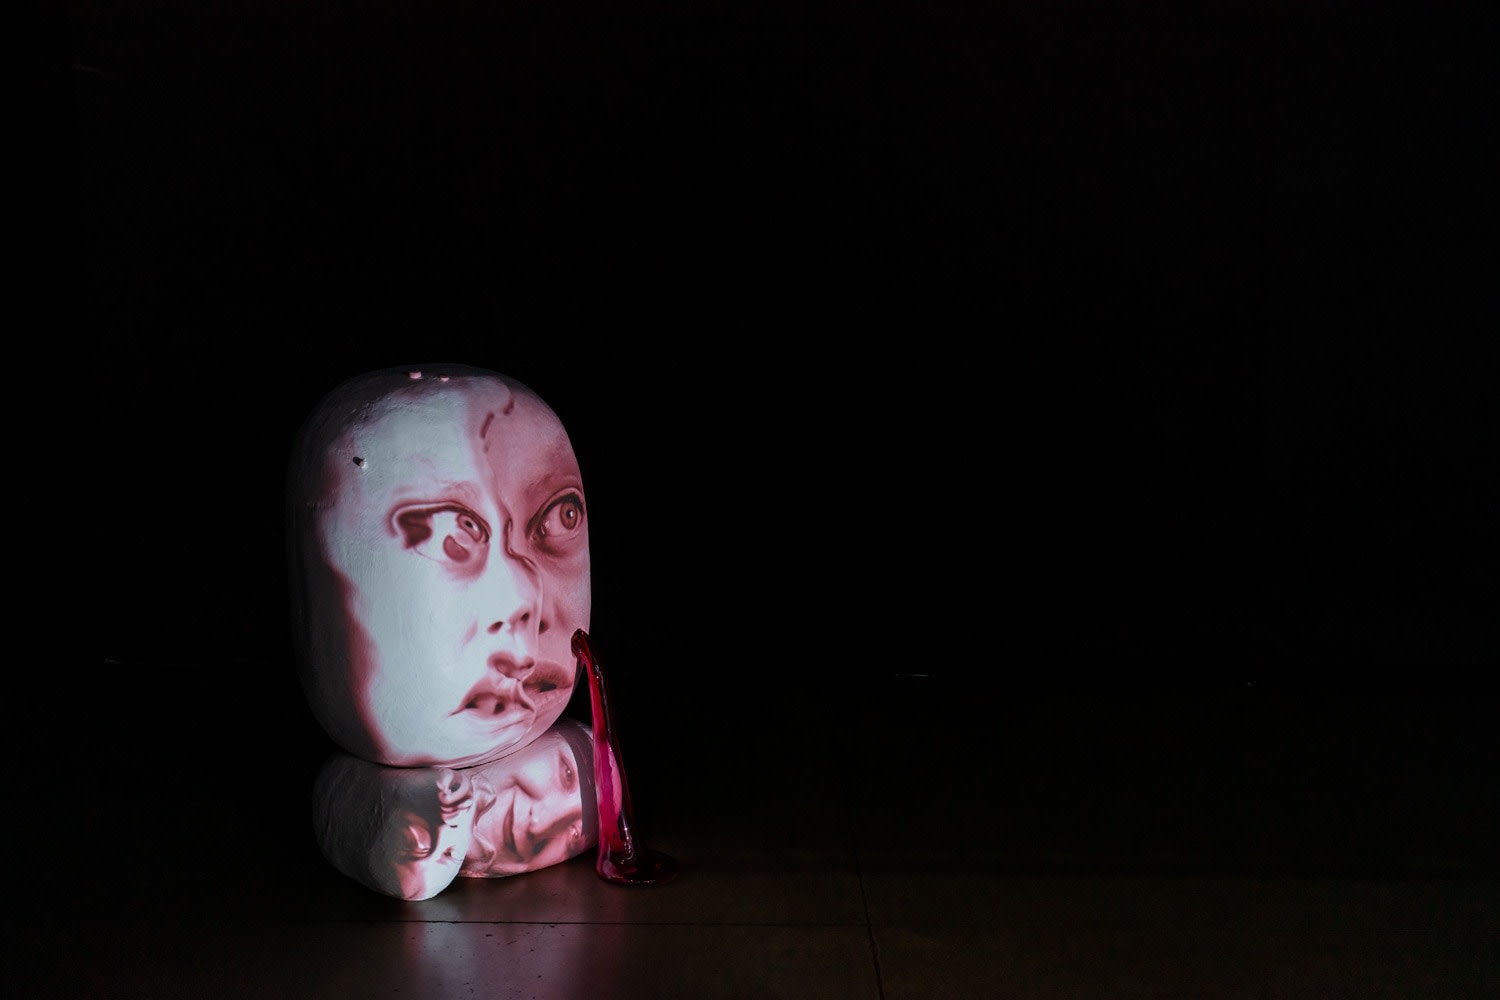 Installation view of special exhibition by Tony Oursler at Taipei Dangdai art fair 2020, view 5